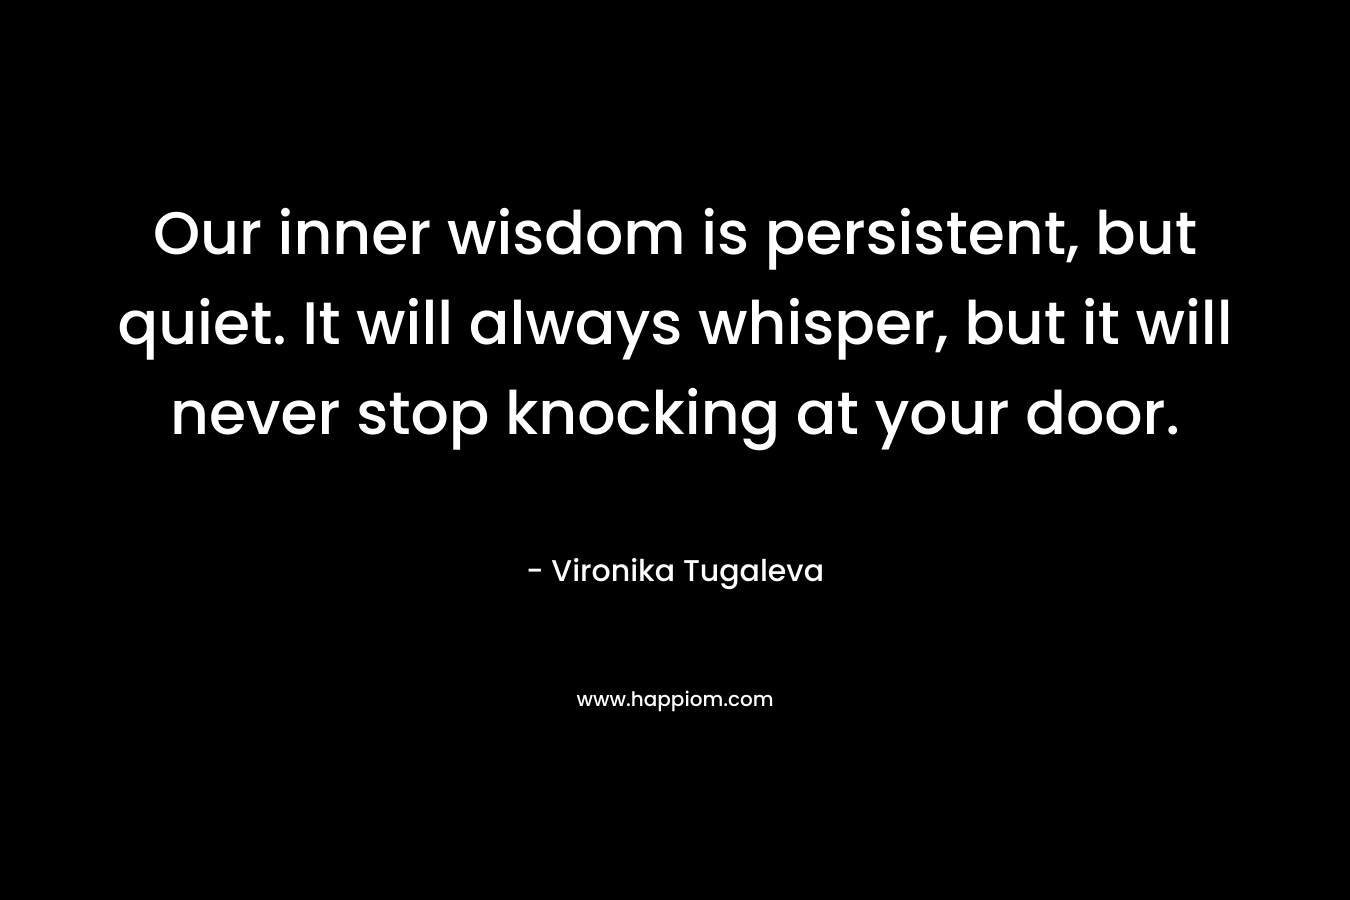 Our inner wisdom is persistent, but quiet. It will always whisper, but it will never stop knocking at your door. – Vironika Tugaleva